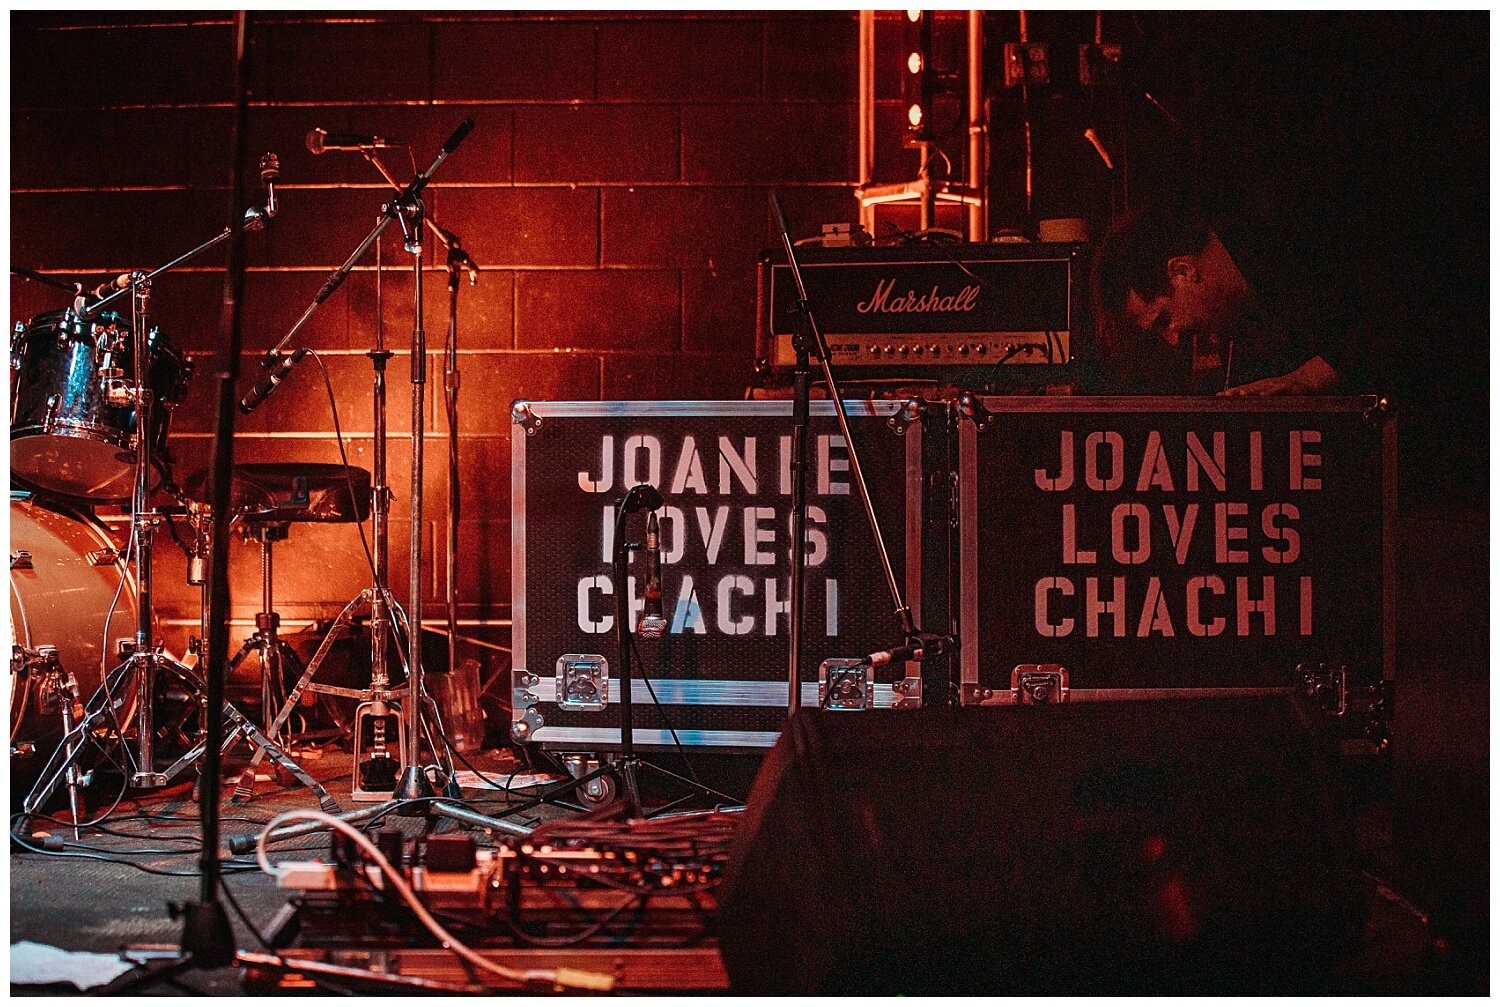 Joanie-Loves-Chachi- Vancouver-Concert-Event- Photographer- Claudia-Wyler-5.jpg